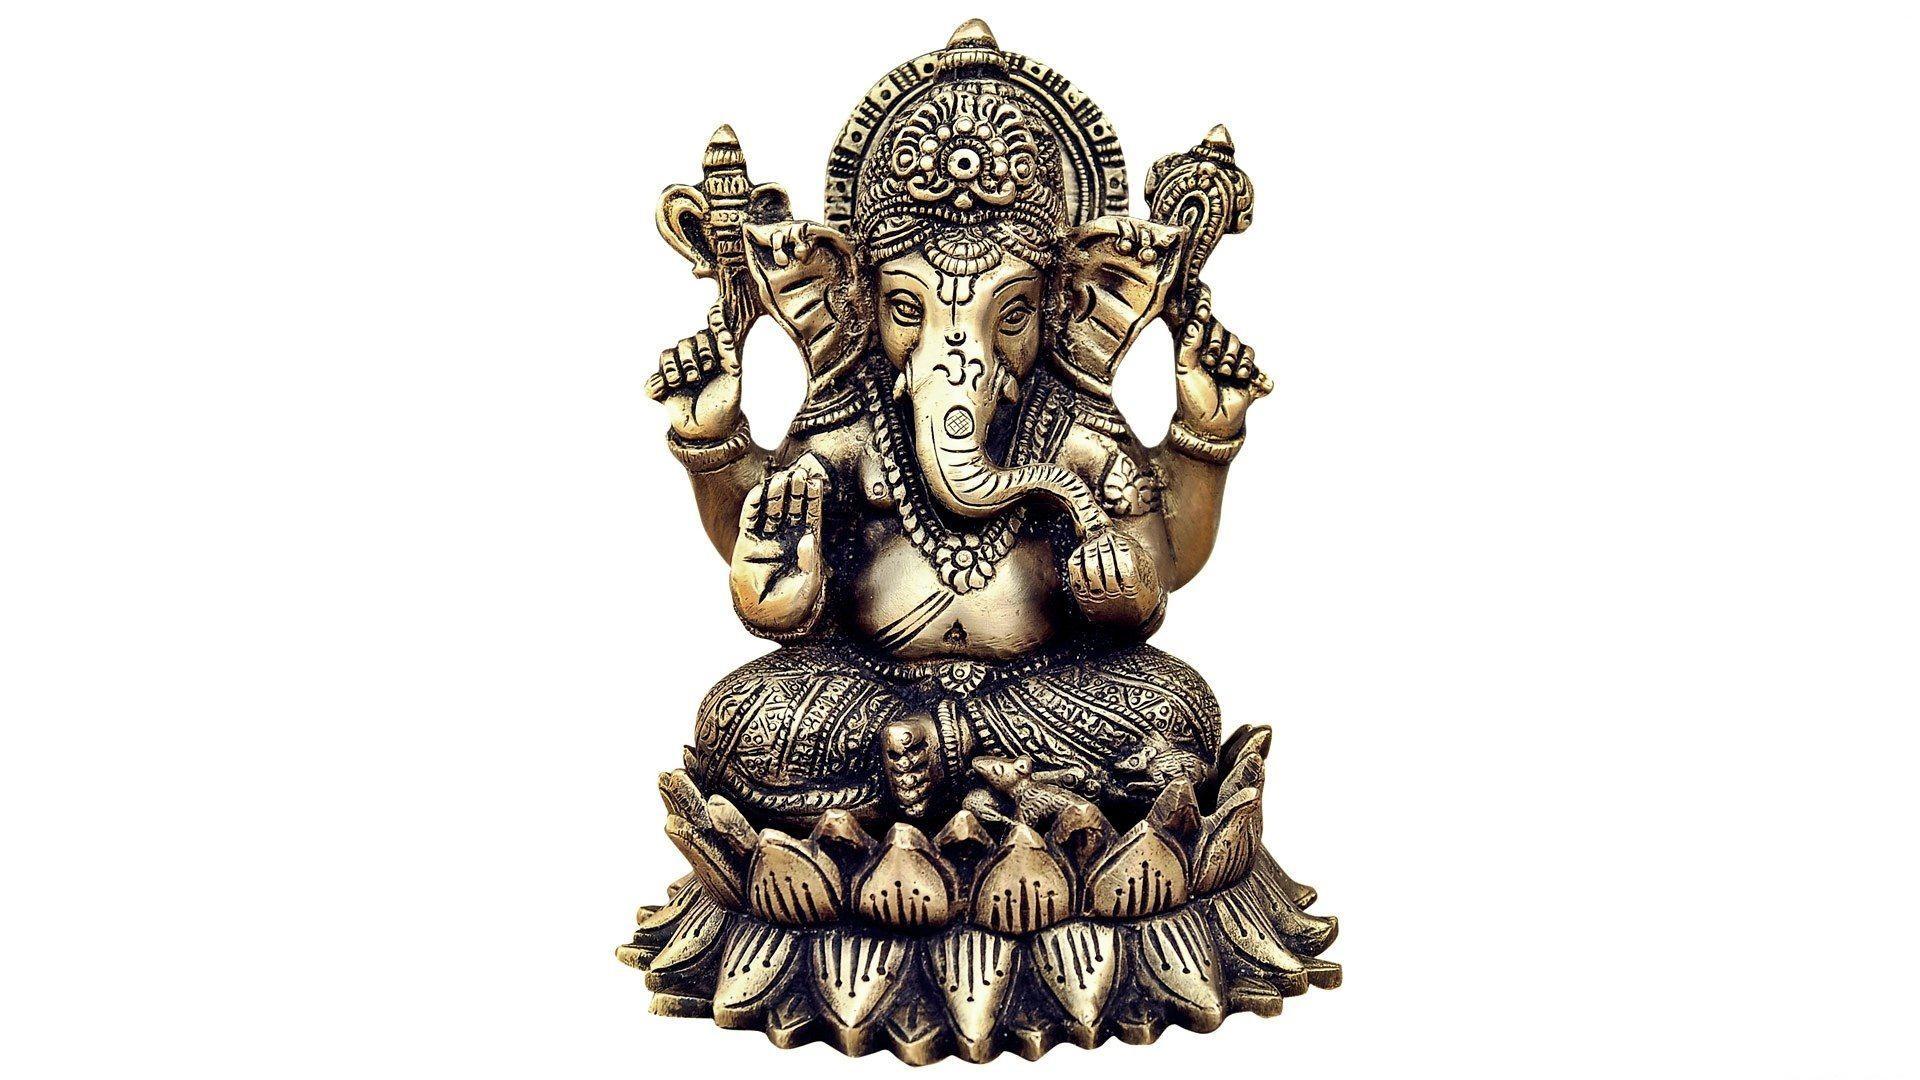 4K wallpaper: Lord Ganesha Hd Wallpapers 1080p For Pc